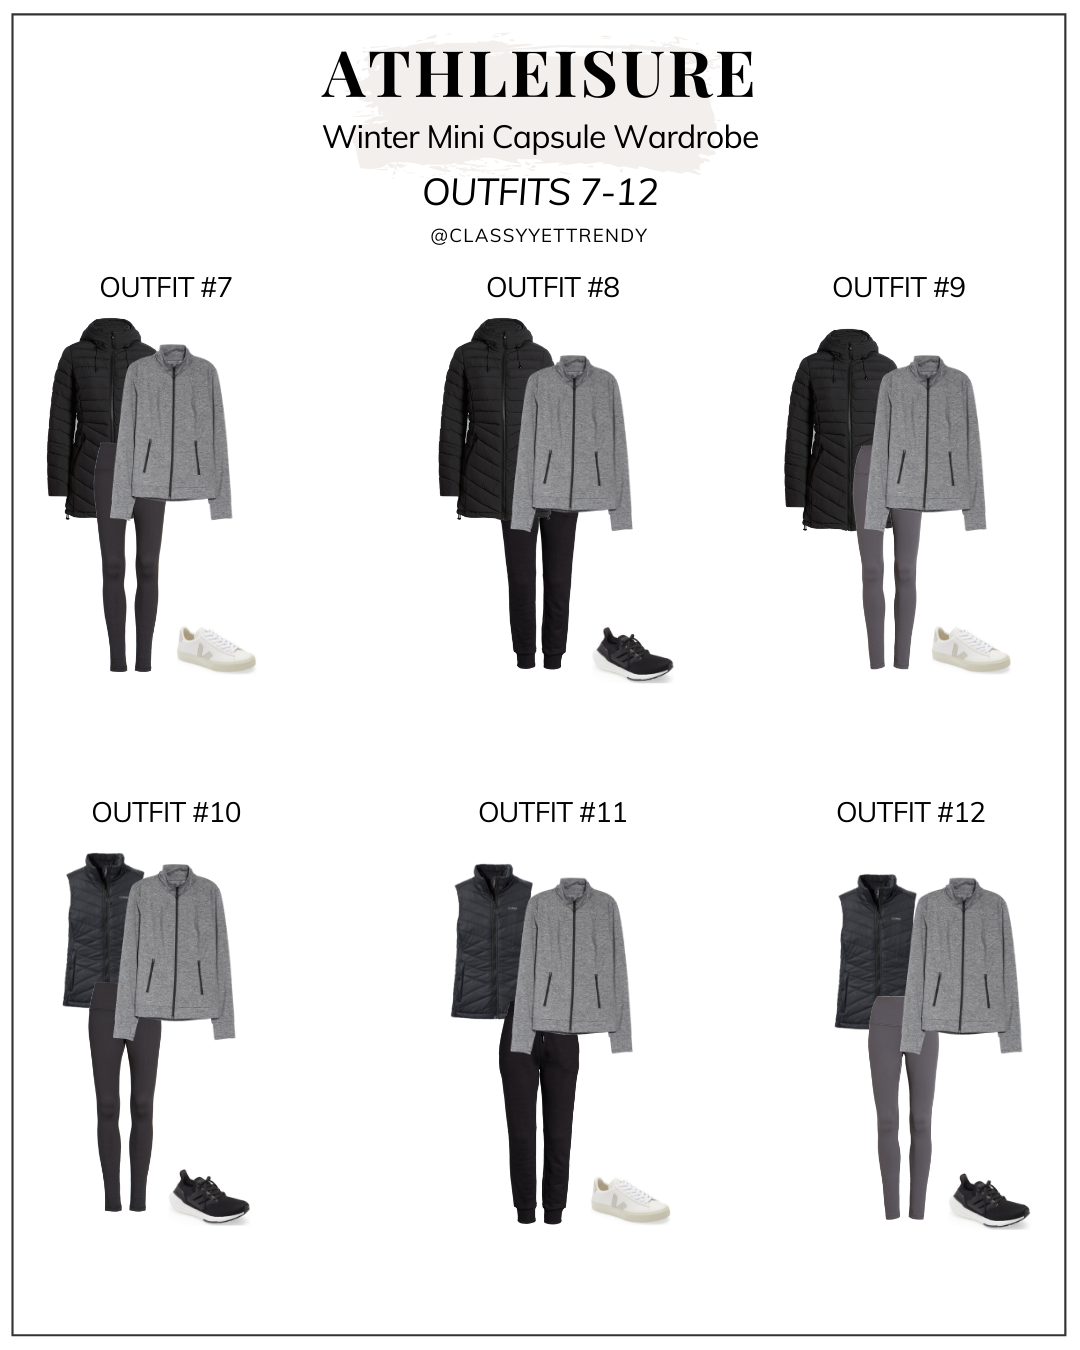 Athleisure Winter Mini Capsule Wardrobe  11 Pieces = 18 Outfits - Classy  Yet Trendy